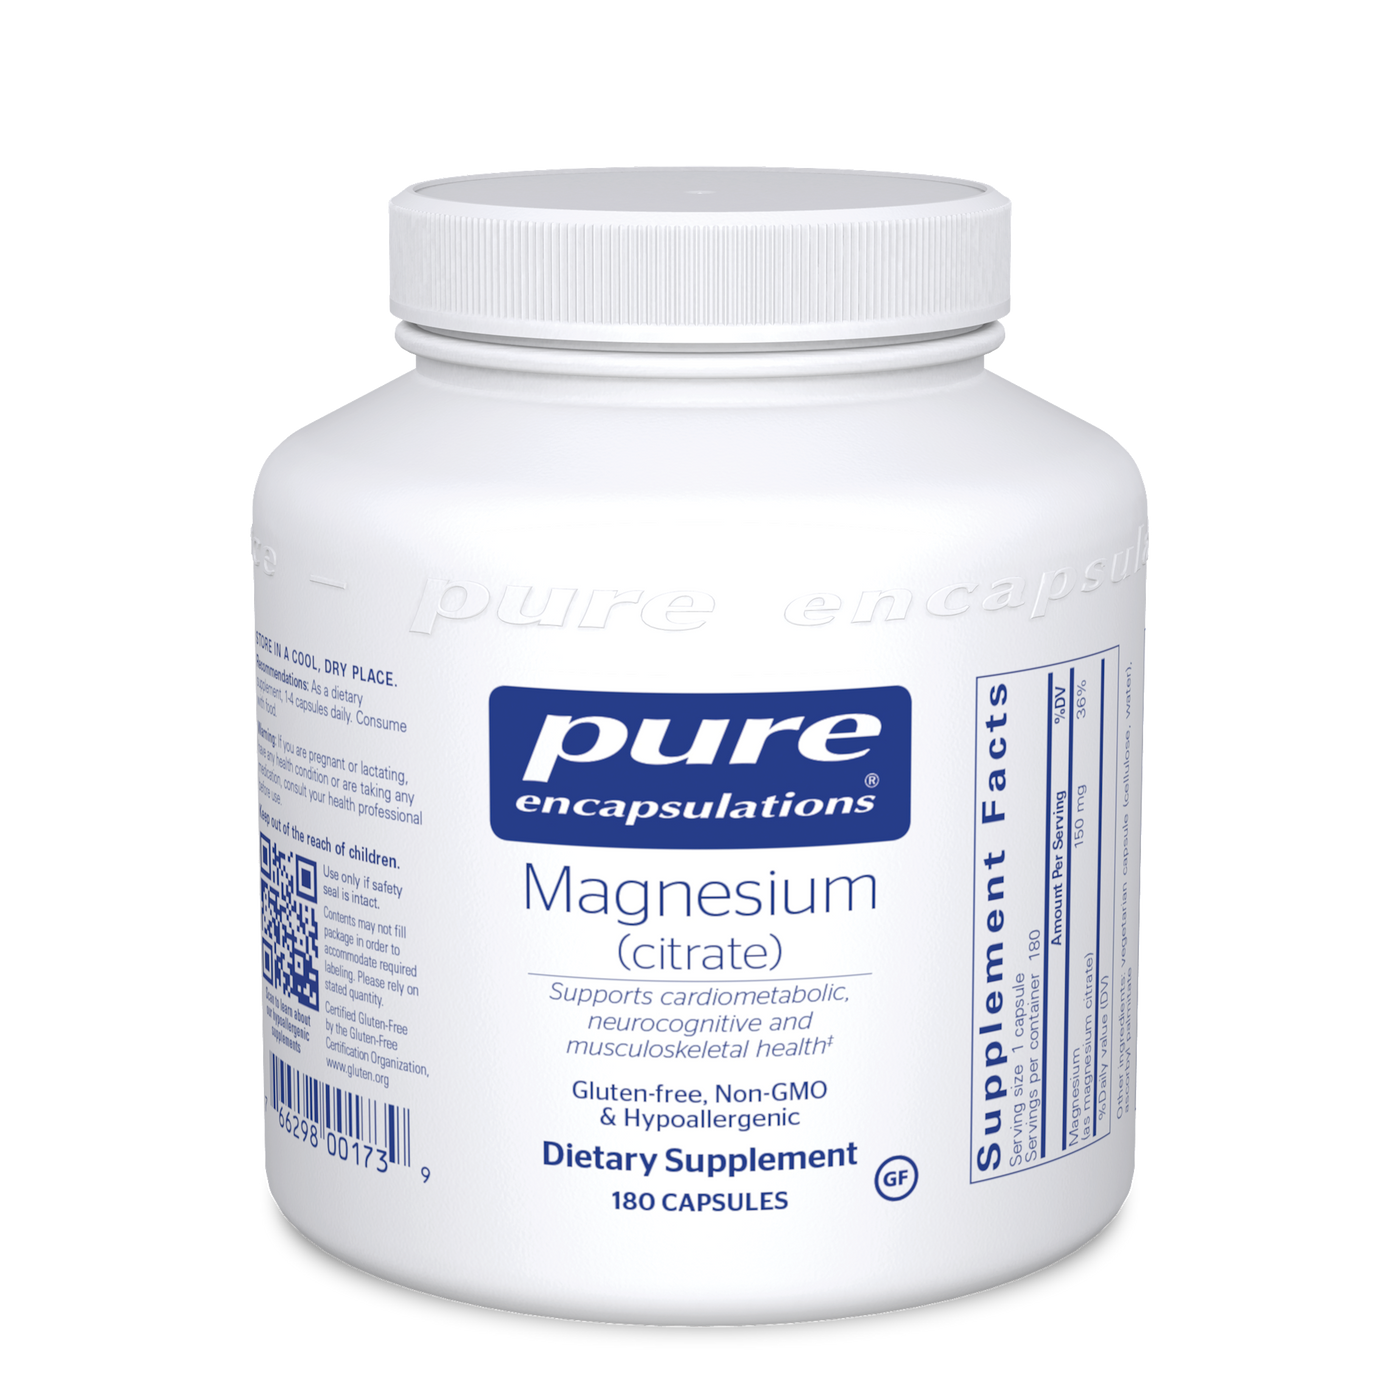 Magnesium (citrate) 150 mg 180 vcaps Curated Wellness